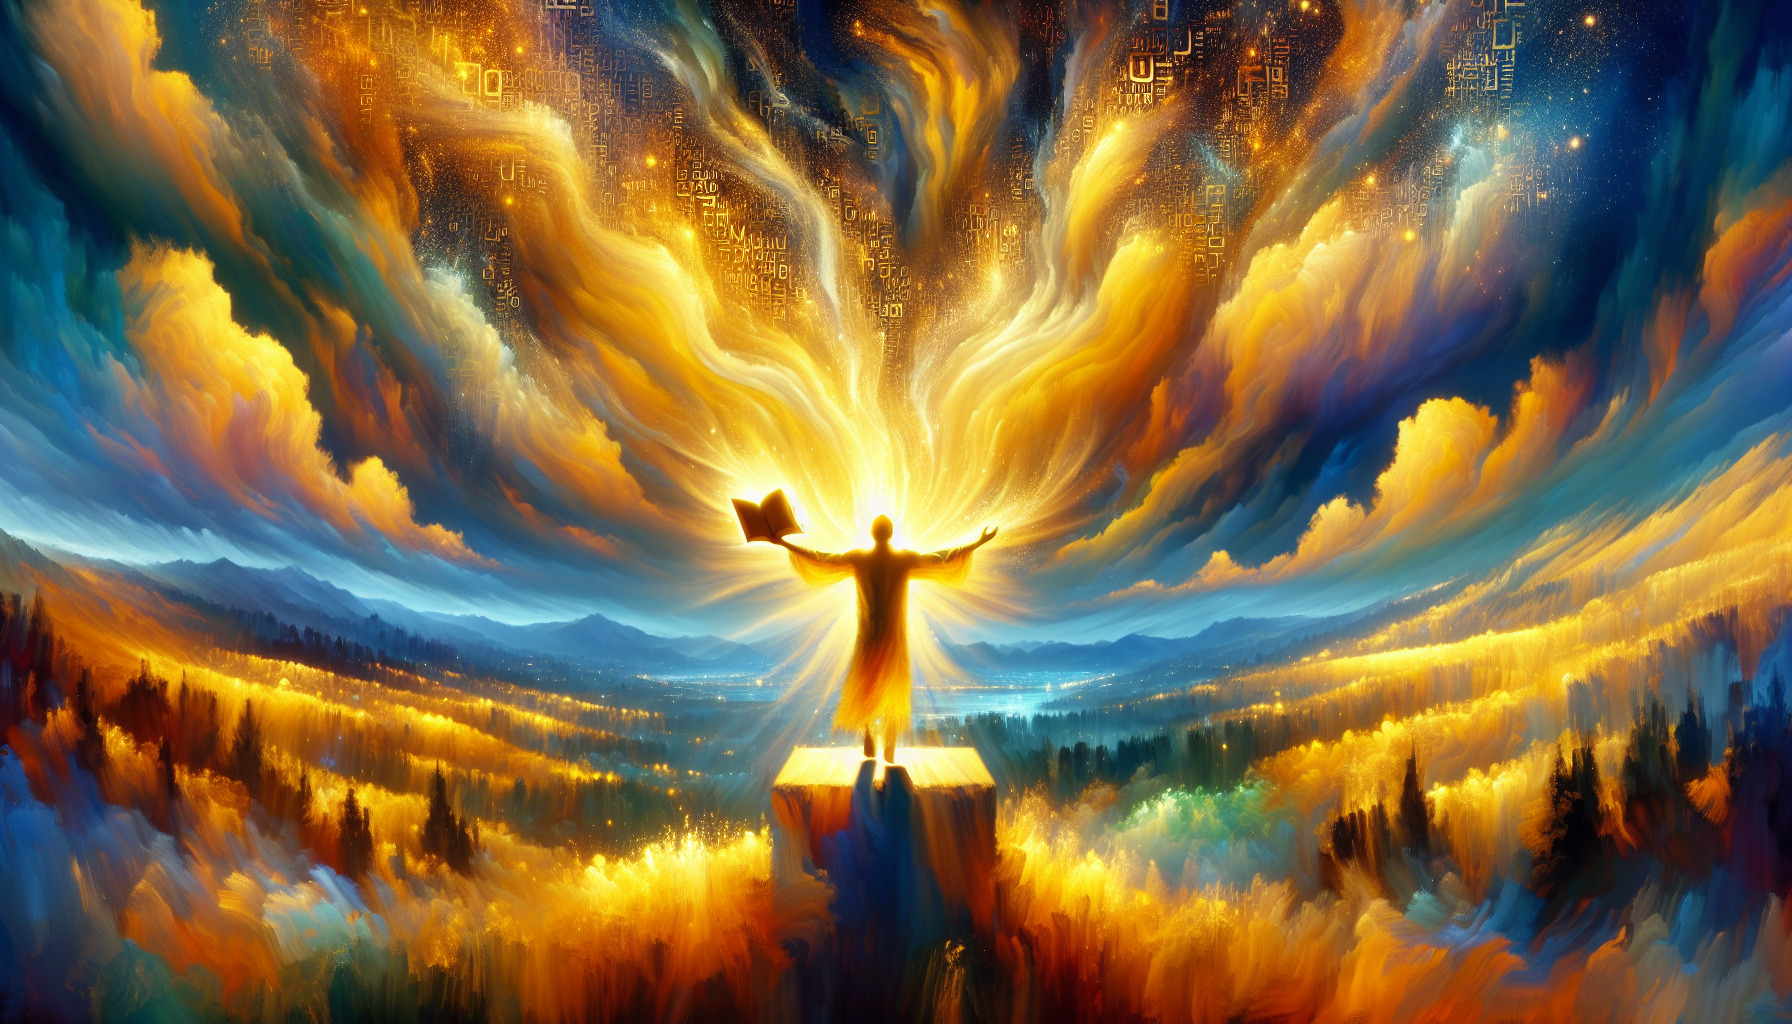 An ethereal digital painting of a serene and luminous landscape, depicting a person standing on a hilltop with open arms, bathed in a soft, golden light that seems to emanate from an open Bible in the